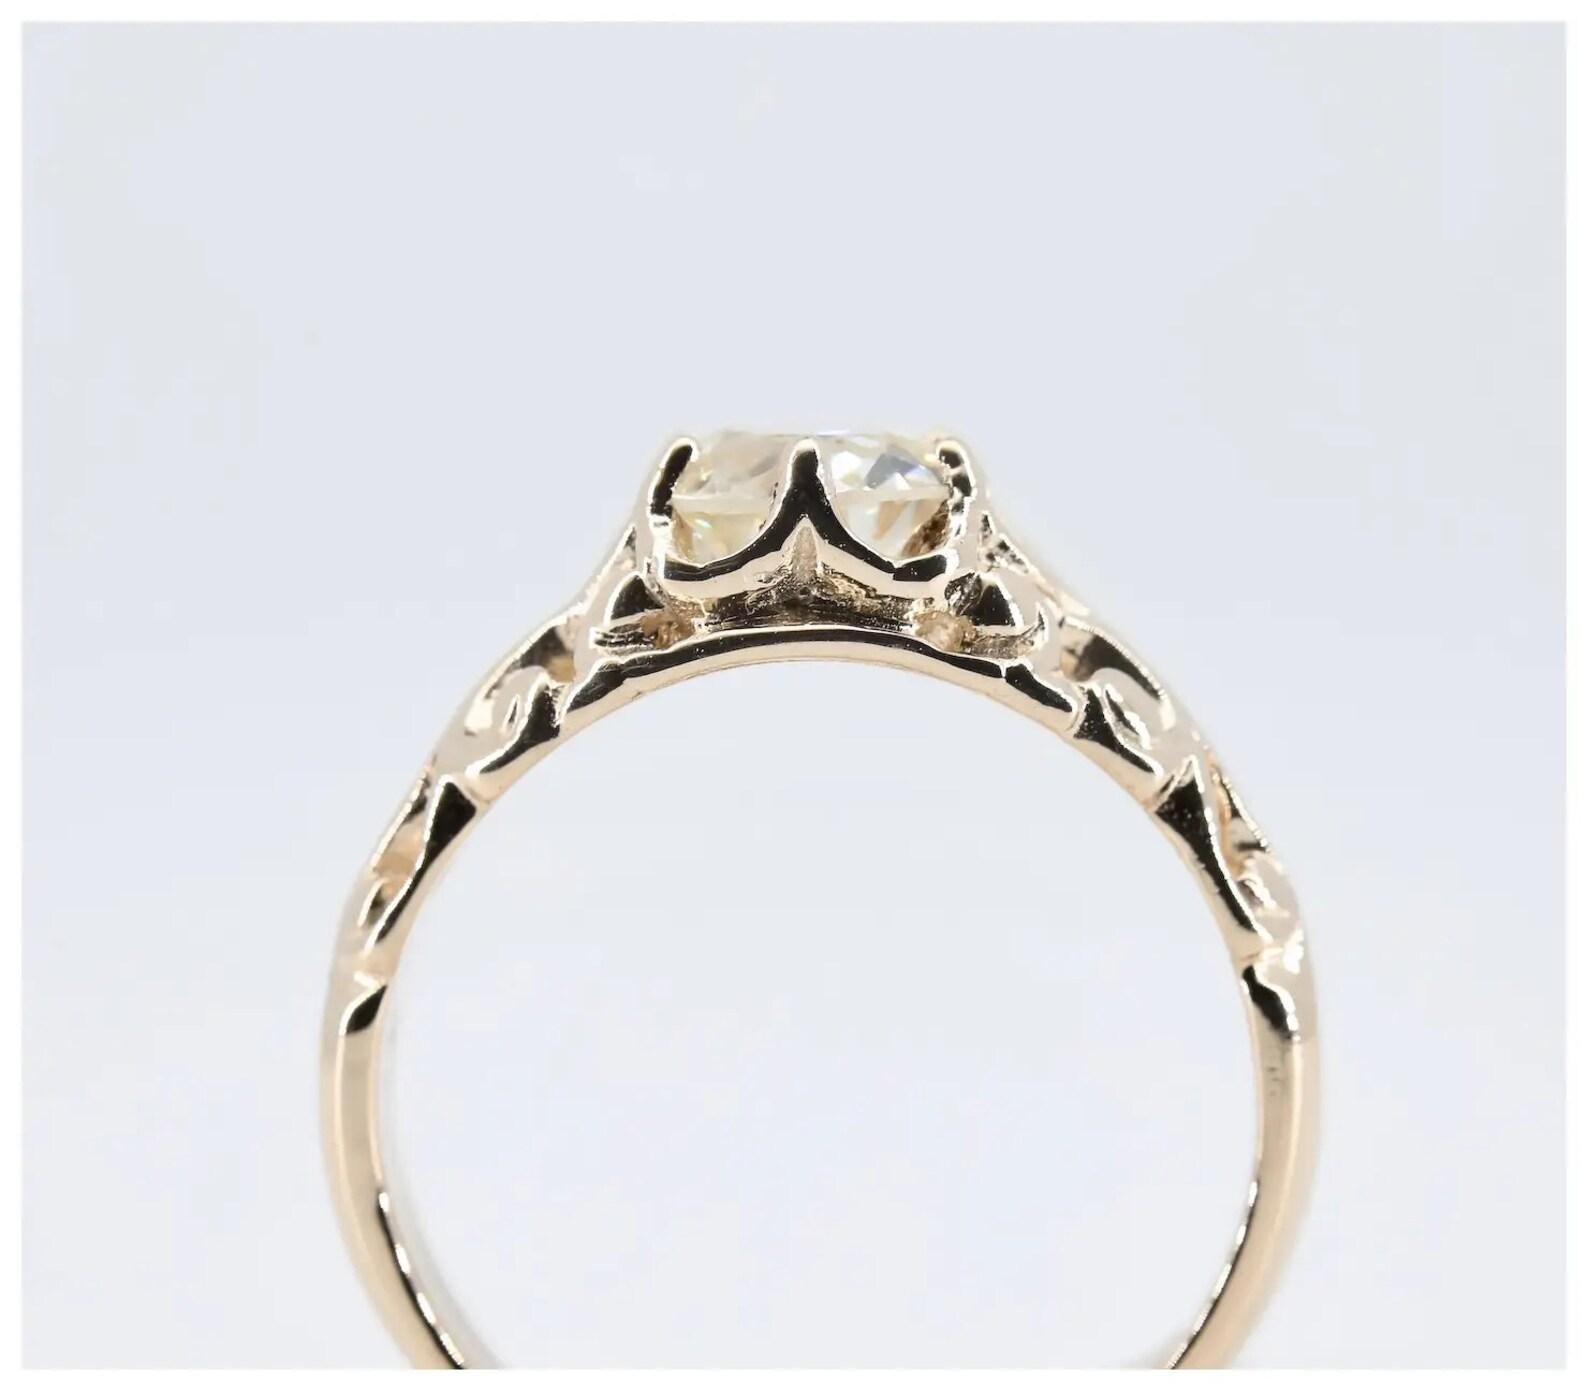 Victorian 1.02ct Diamond Solitaire Scroll Work Engagement Ring in 14K Gold In Good Condition For Sale In Boston, MA